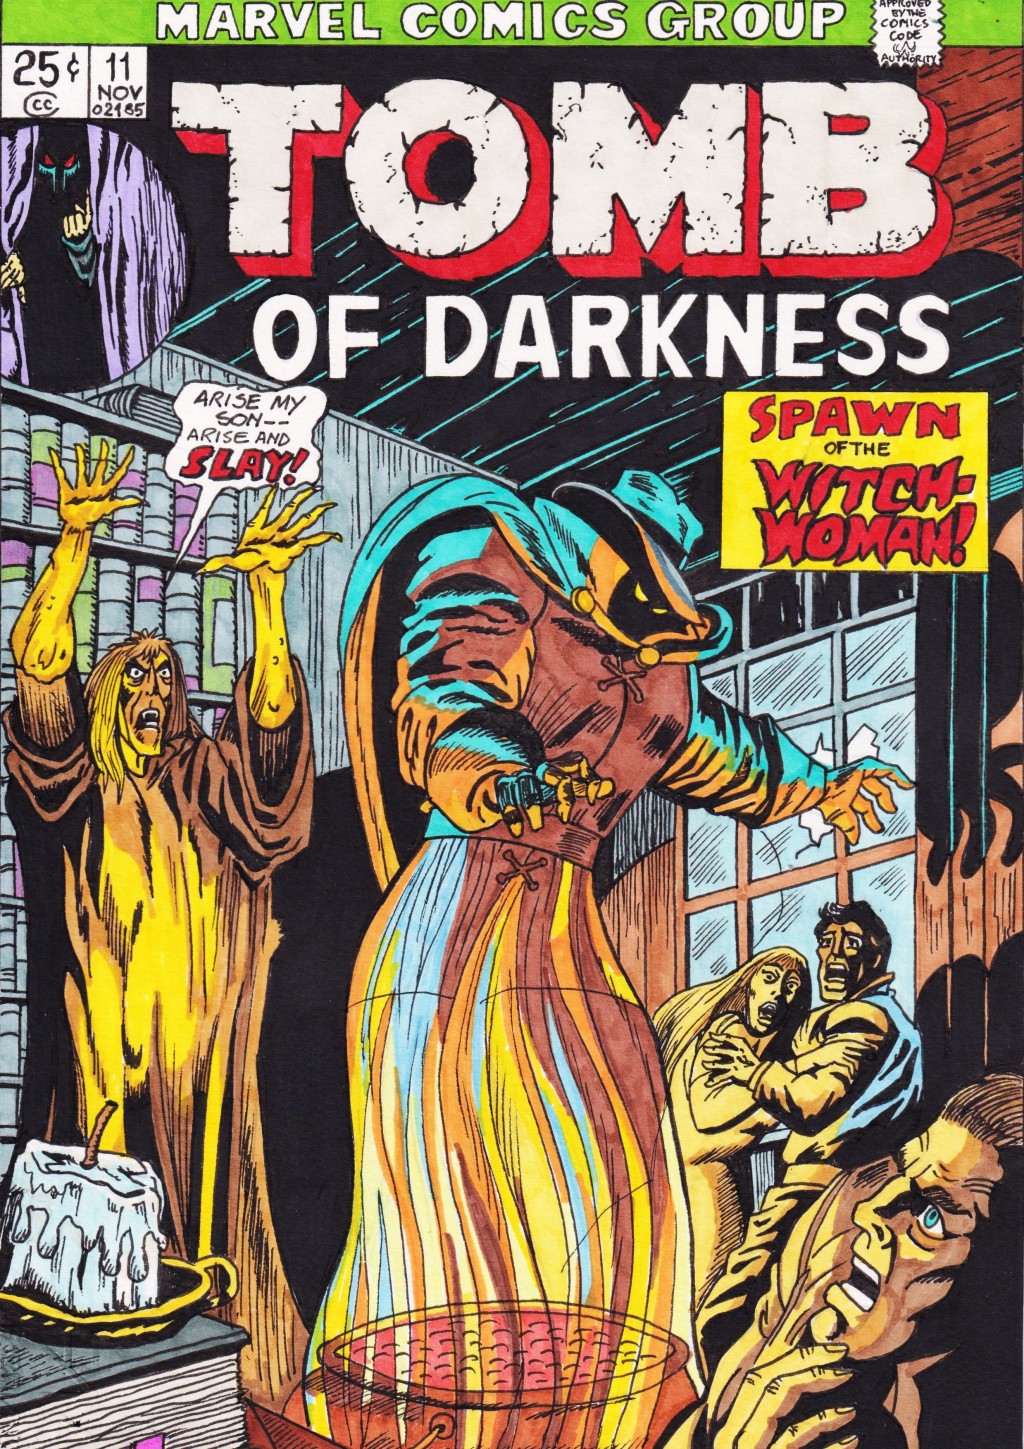 Marvel Comics: Tomb of Darkness “Spawn of the Witch Woman”